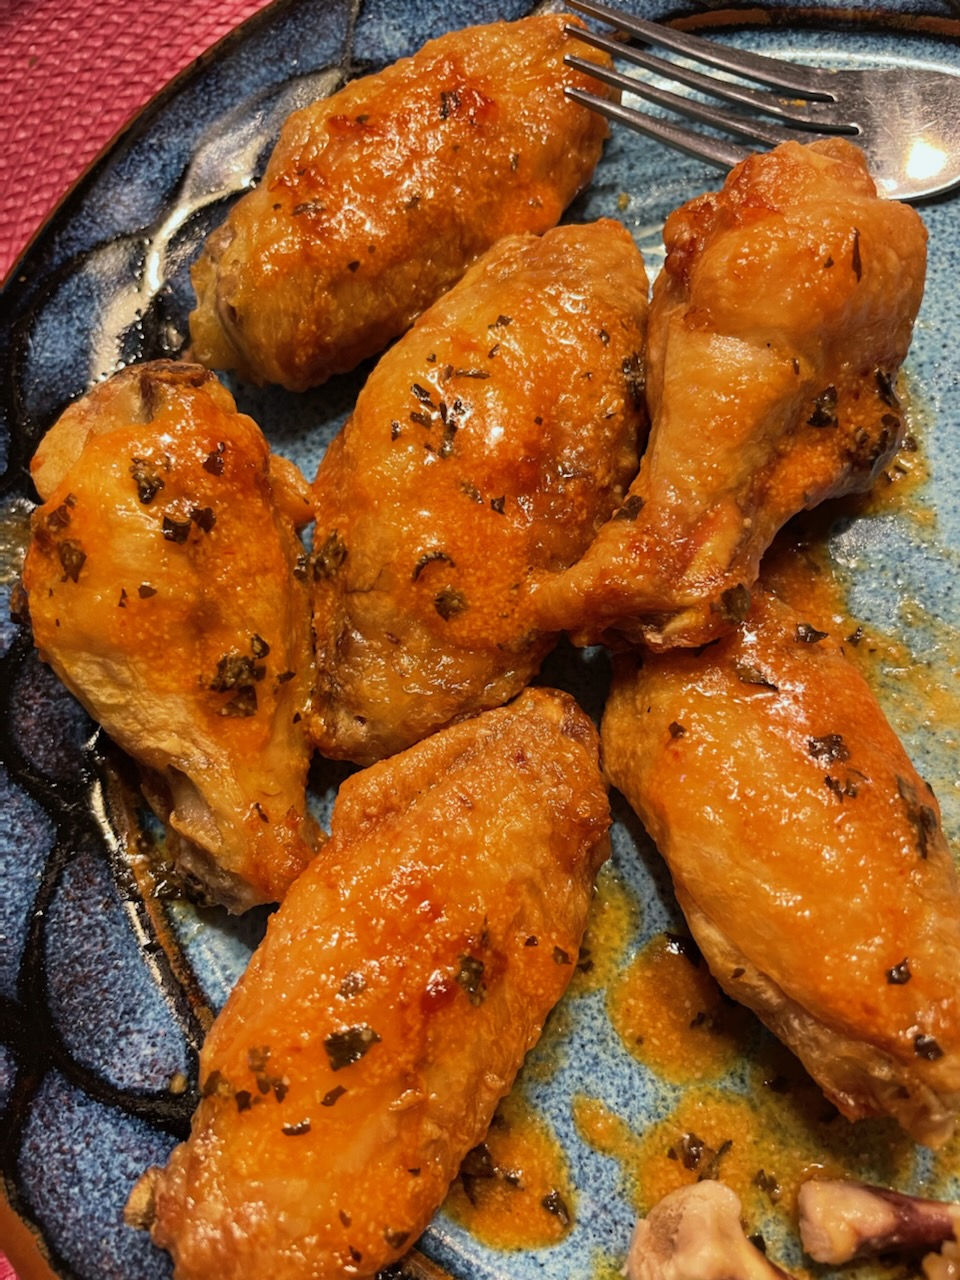 baked wings with garlic powder and herbs